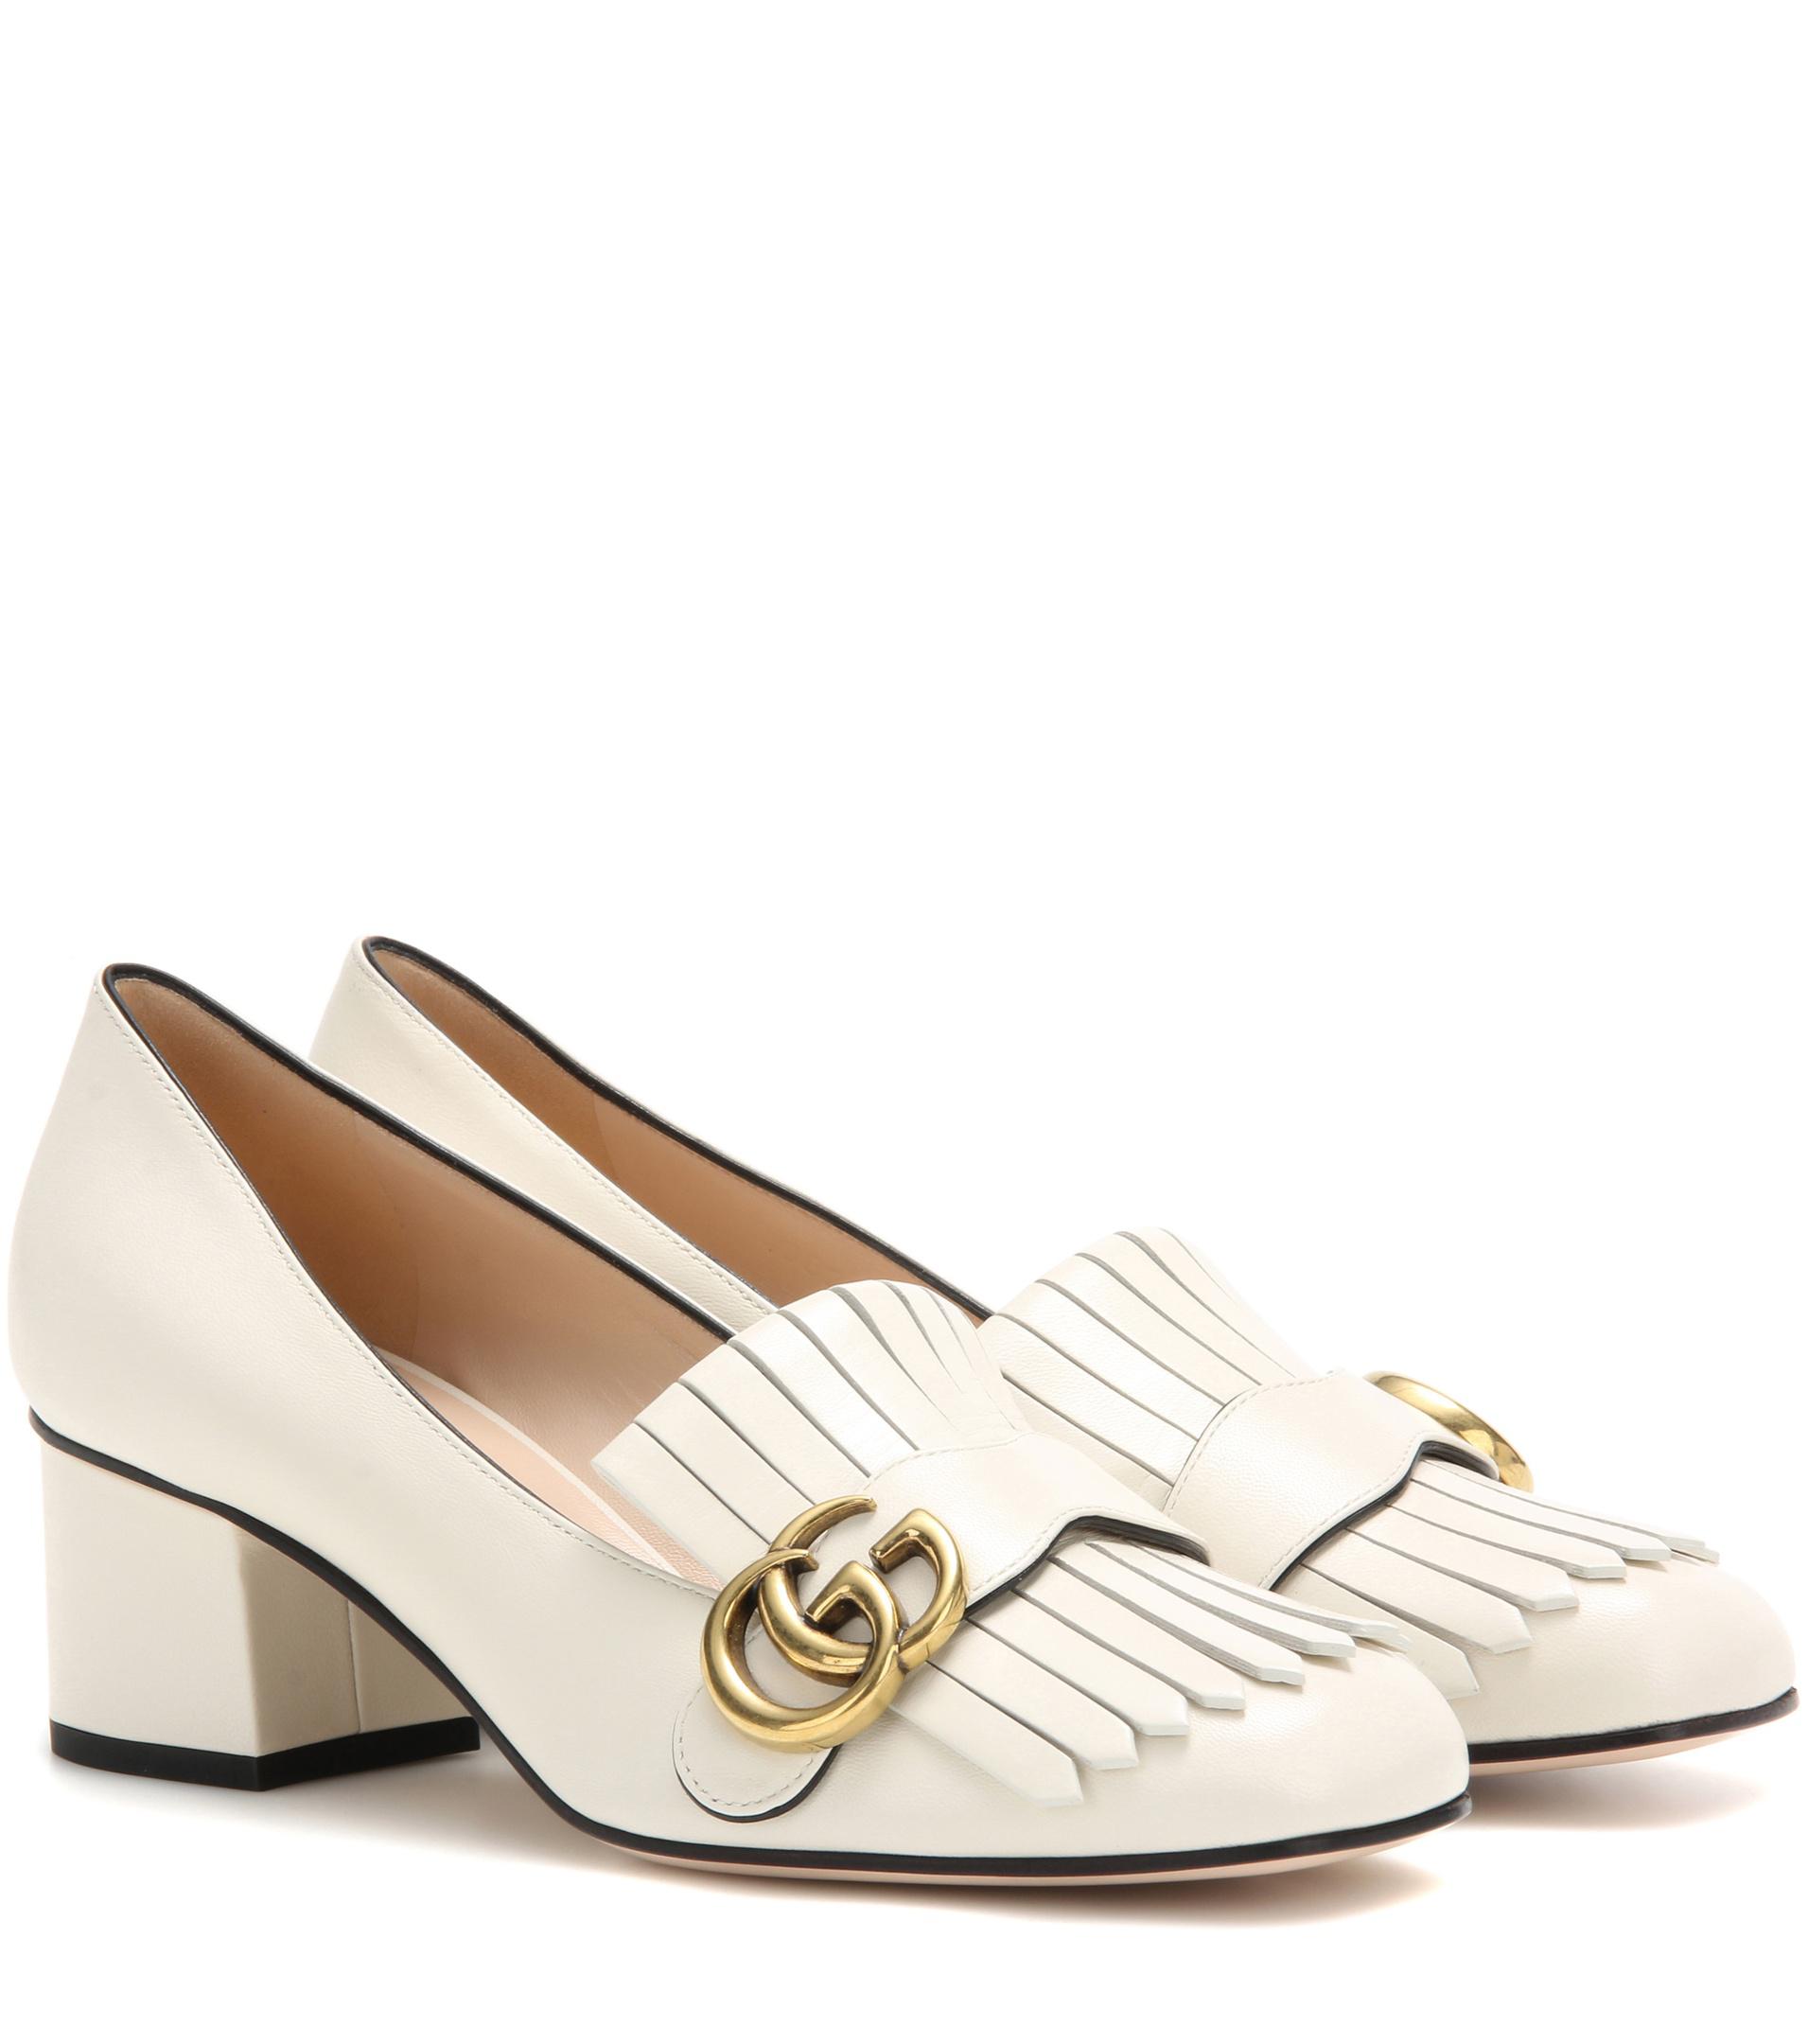 Lyst - Gucci Leather Loafer Pumps in White